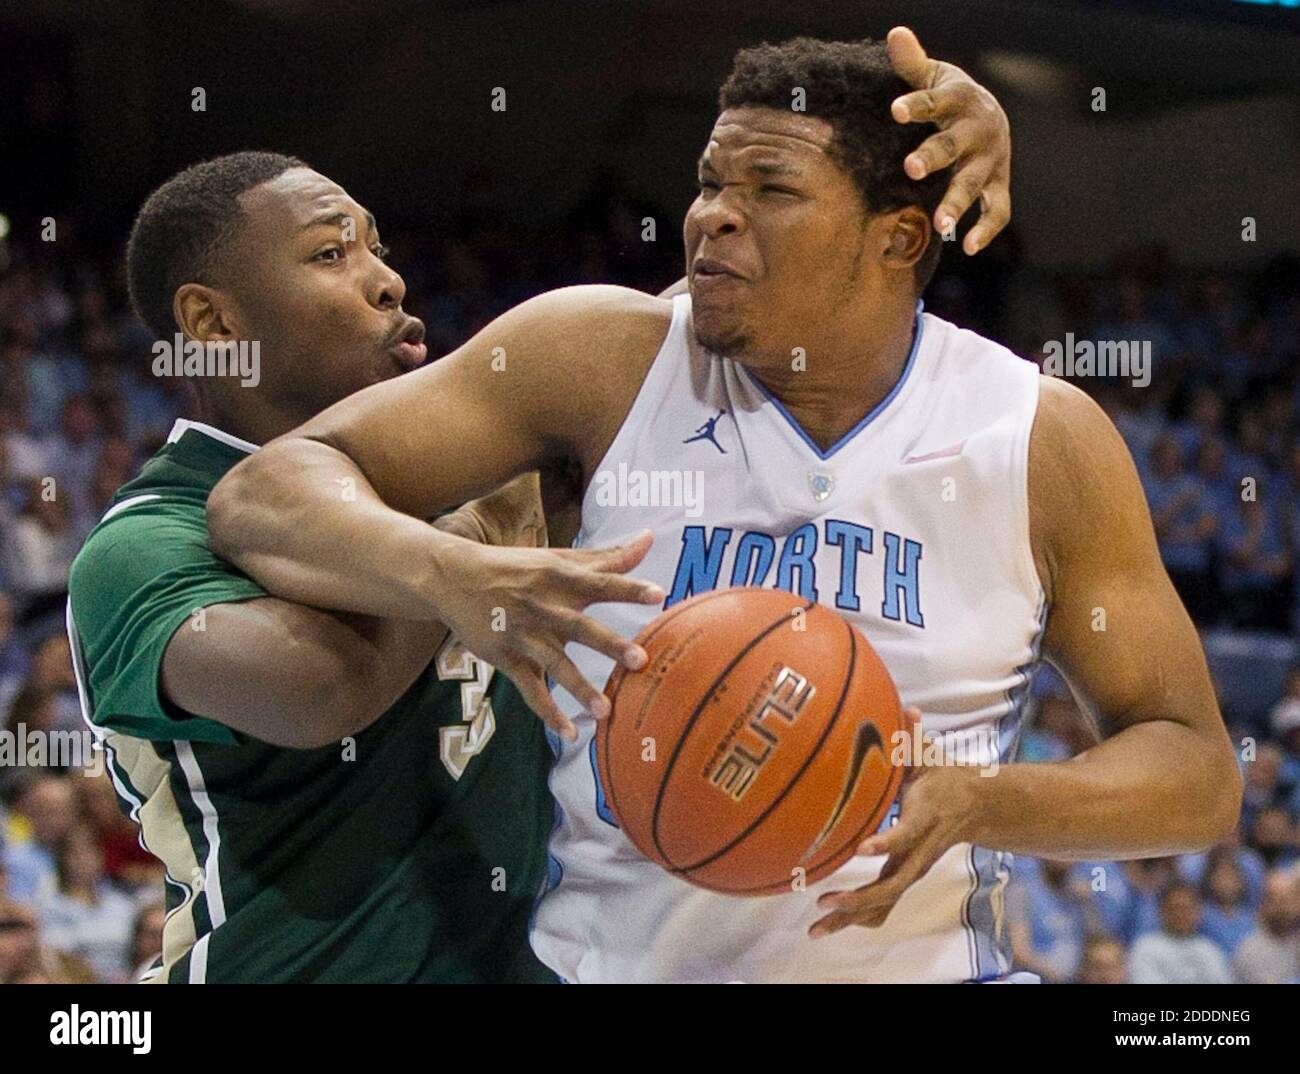 NO FILM, NO VIDEO, NO TV, NO DOCUMENTARY - UAB's Chris Cokely (3) give North Carolina's Kennedy Meeks a tap on the head during the second half at the Smith Center in Chapel Hill, NC, USA, on Saturday, December 27, 2014. The host Tar Heels won, 89-58. Photo by Robert Willett/Raleigh News & Observer/TNS/ABACAPRESS.COM Stock Photo